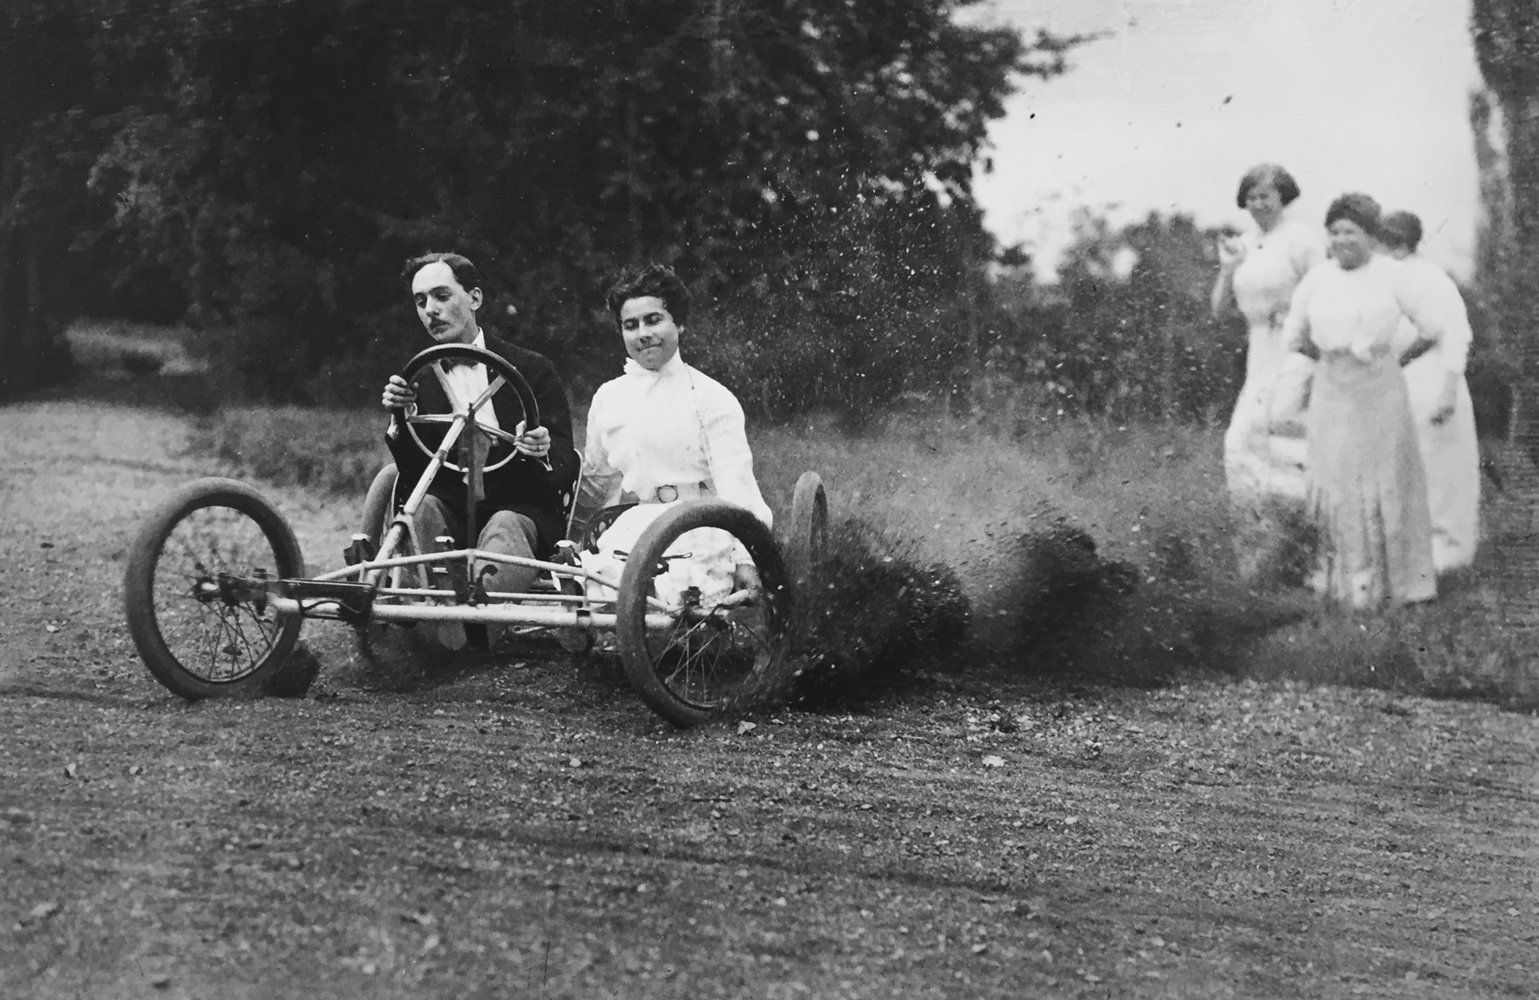 Jacques-Henri Lartigue, Bobsled race – Zissou and Madeleine Thibault in the bobsled, Mme. Folletête,Tatane & Maman Rouzat, September 20, 1911, gelatin silver print, 12 x 16 inches, signed by artist with JHL blind stamp in margin